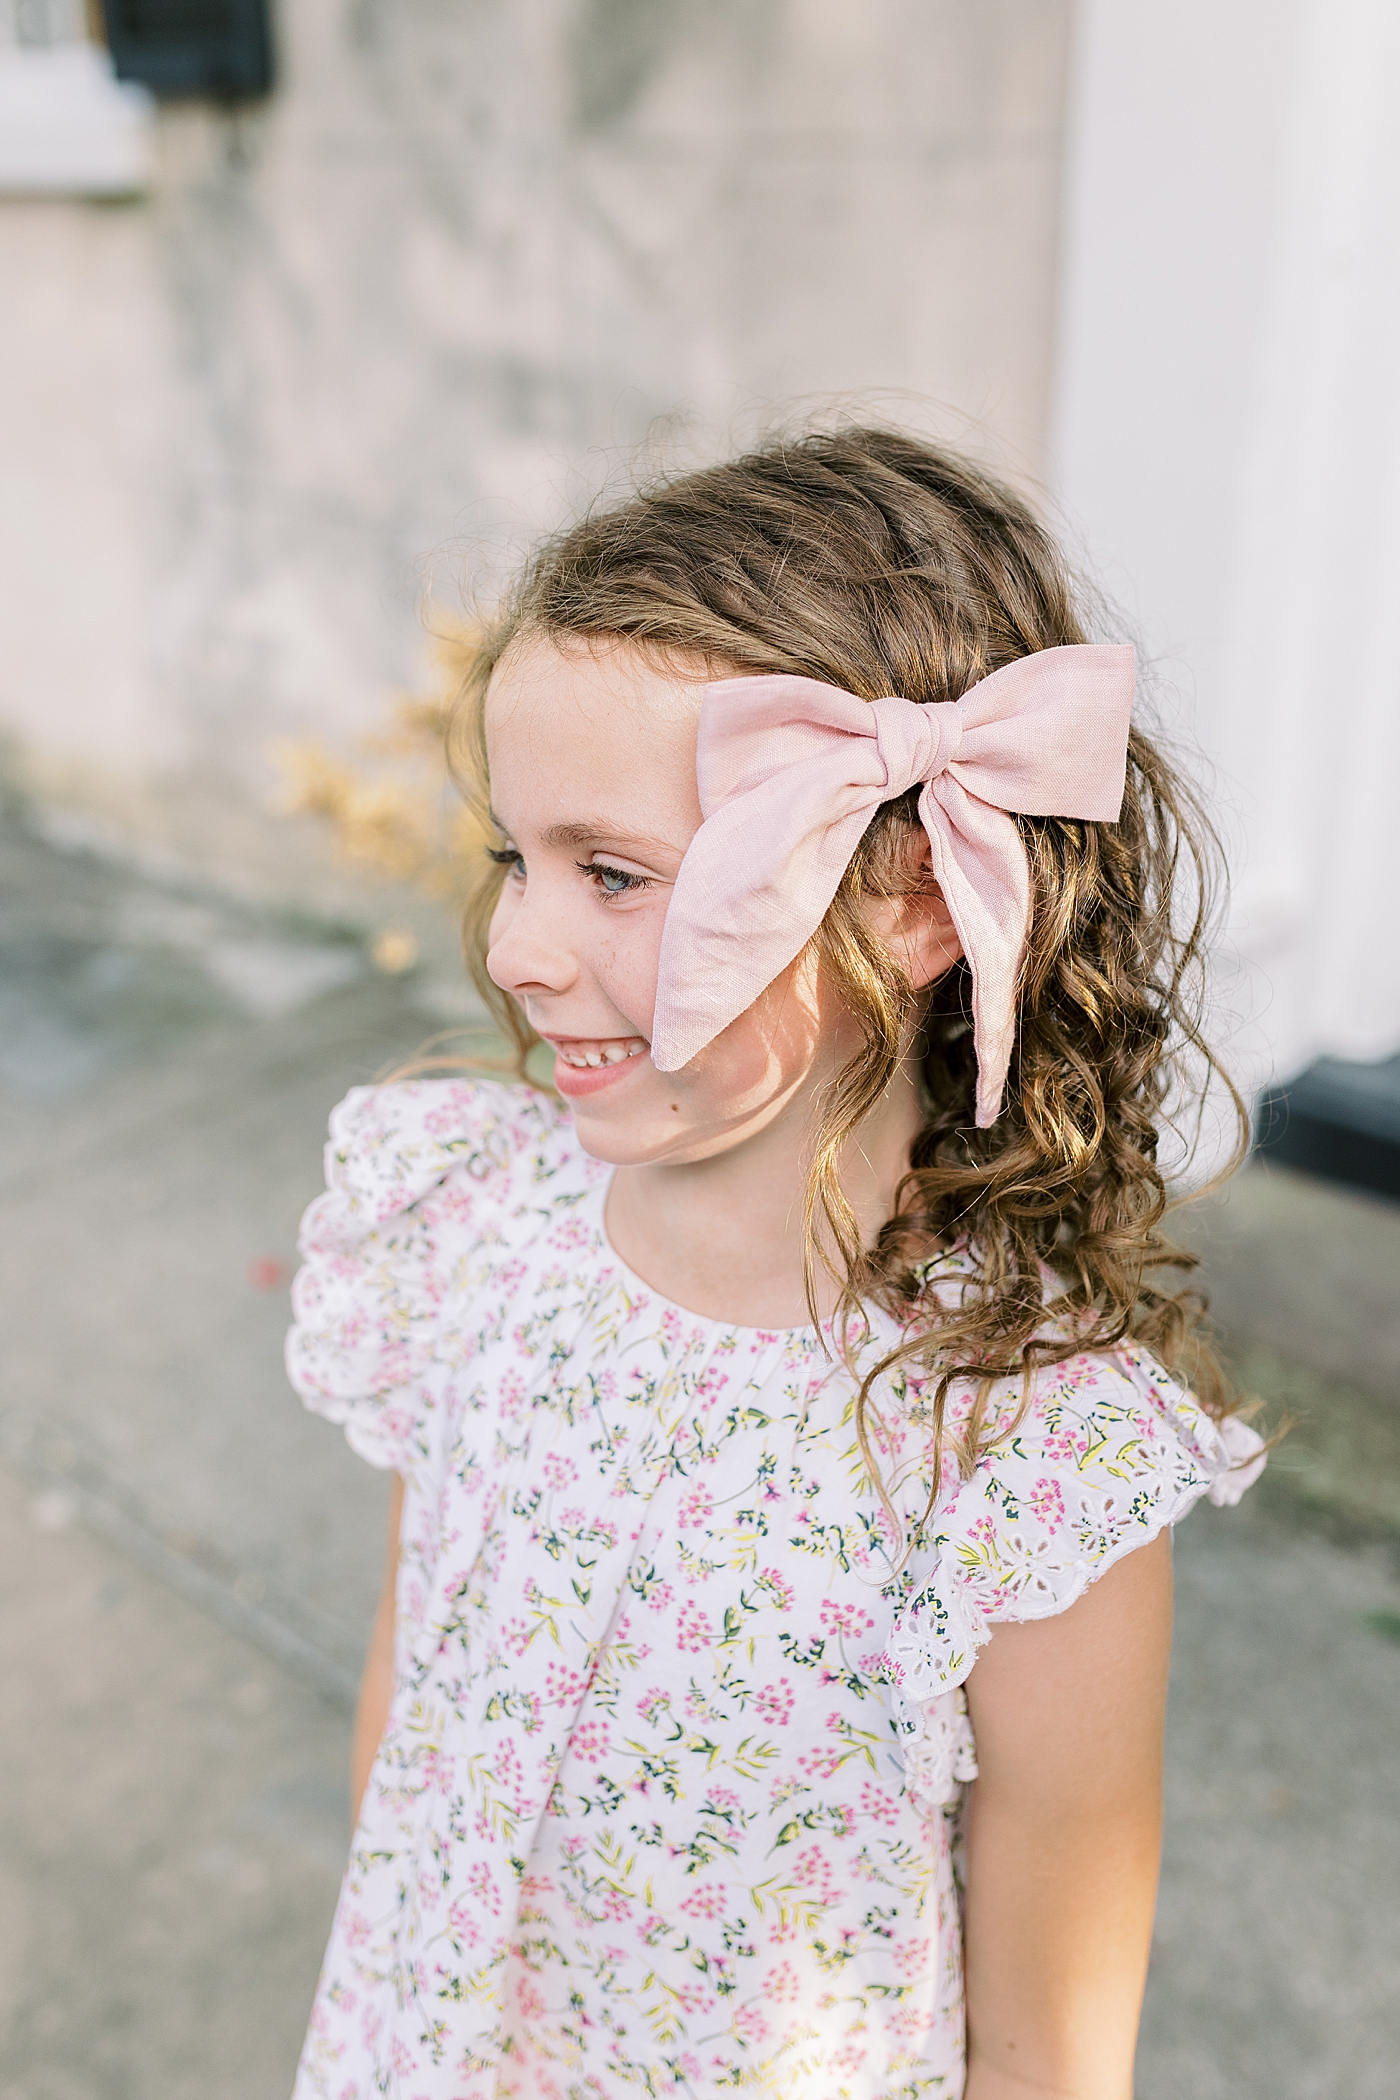 Little girl with a pink bow smiling | Photo by Caitlyn Motycka Photography